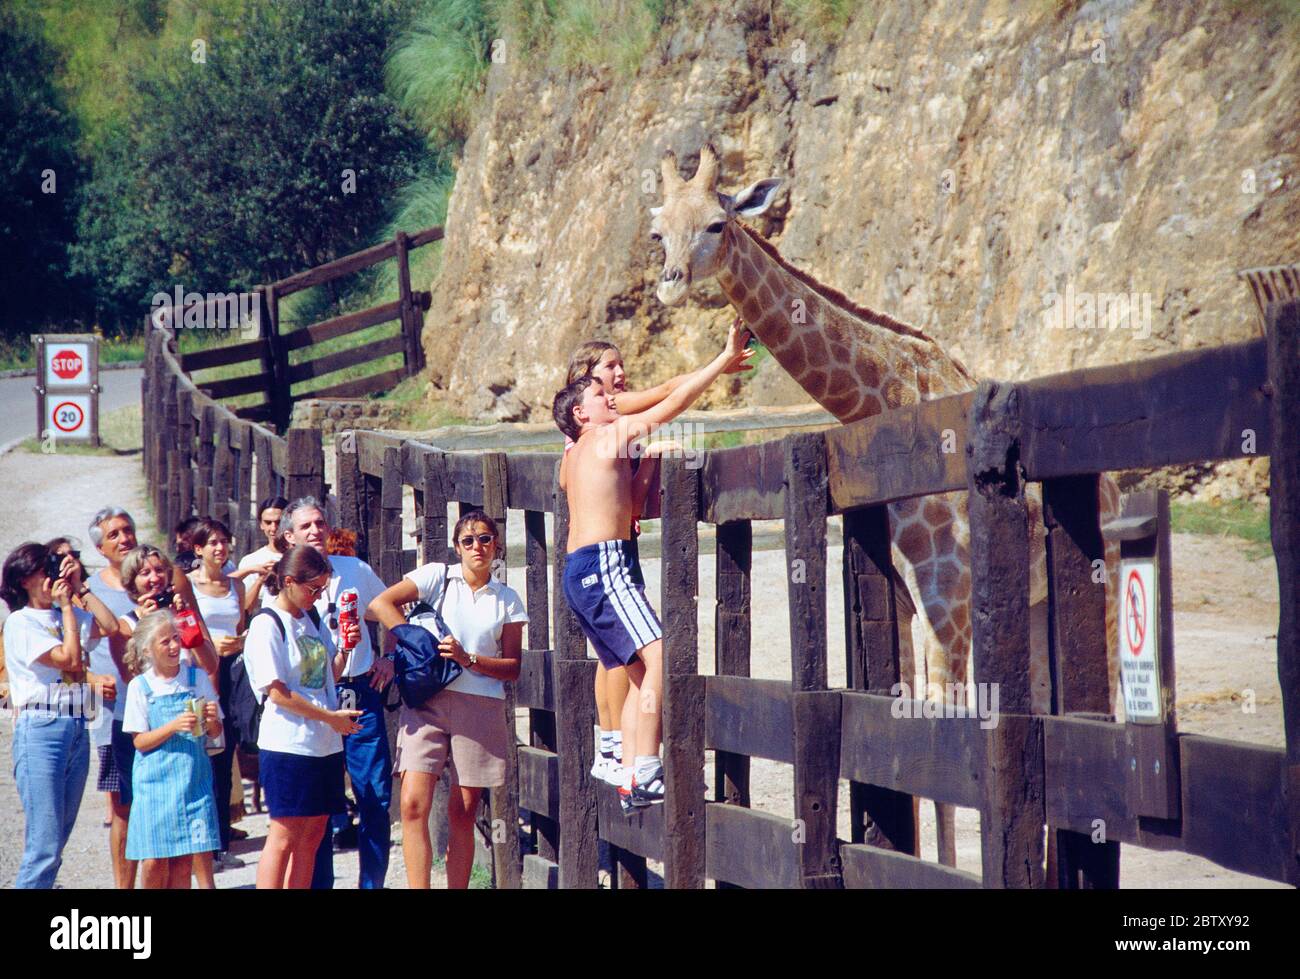 Group of tourists looking at the giraffe and two children stroking her. Parque de la Naturaleza de Cabarceno, Cantabria, Spain. Stock Photo